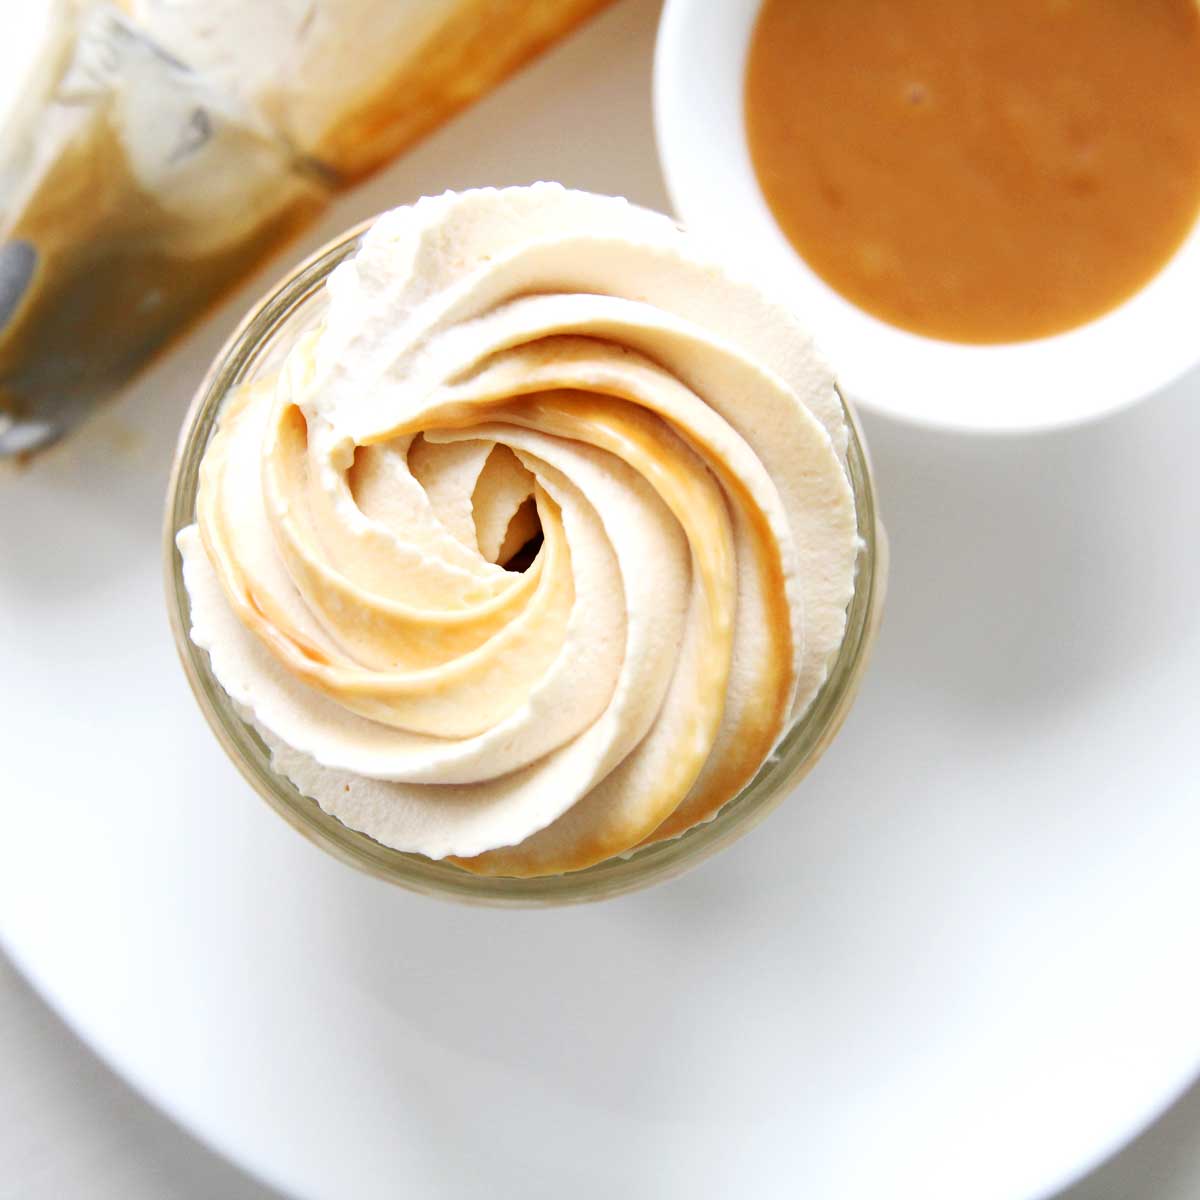 Swirled Caramel Whipped Cream Recipe Perfect for Coffee, Cakes and More - swiss roll